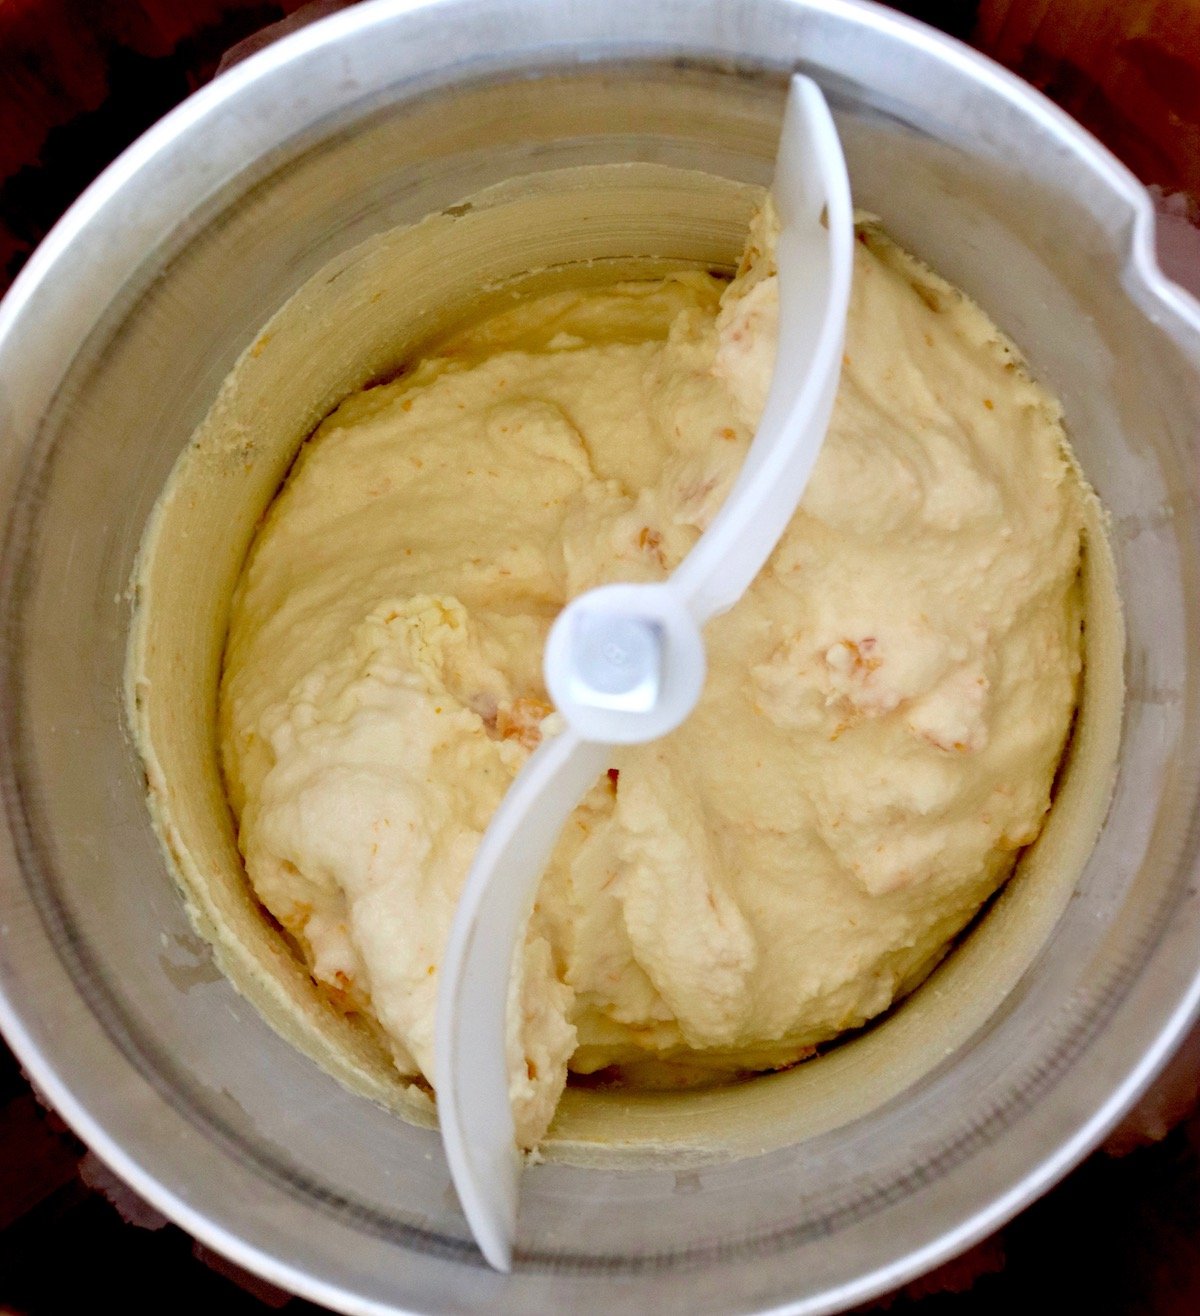 Top view of ice cream maker with churned creamsicle ice cream.